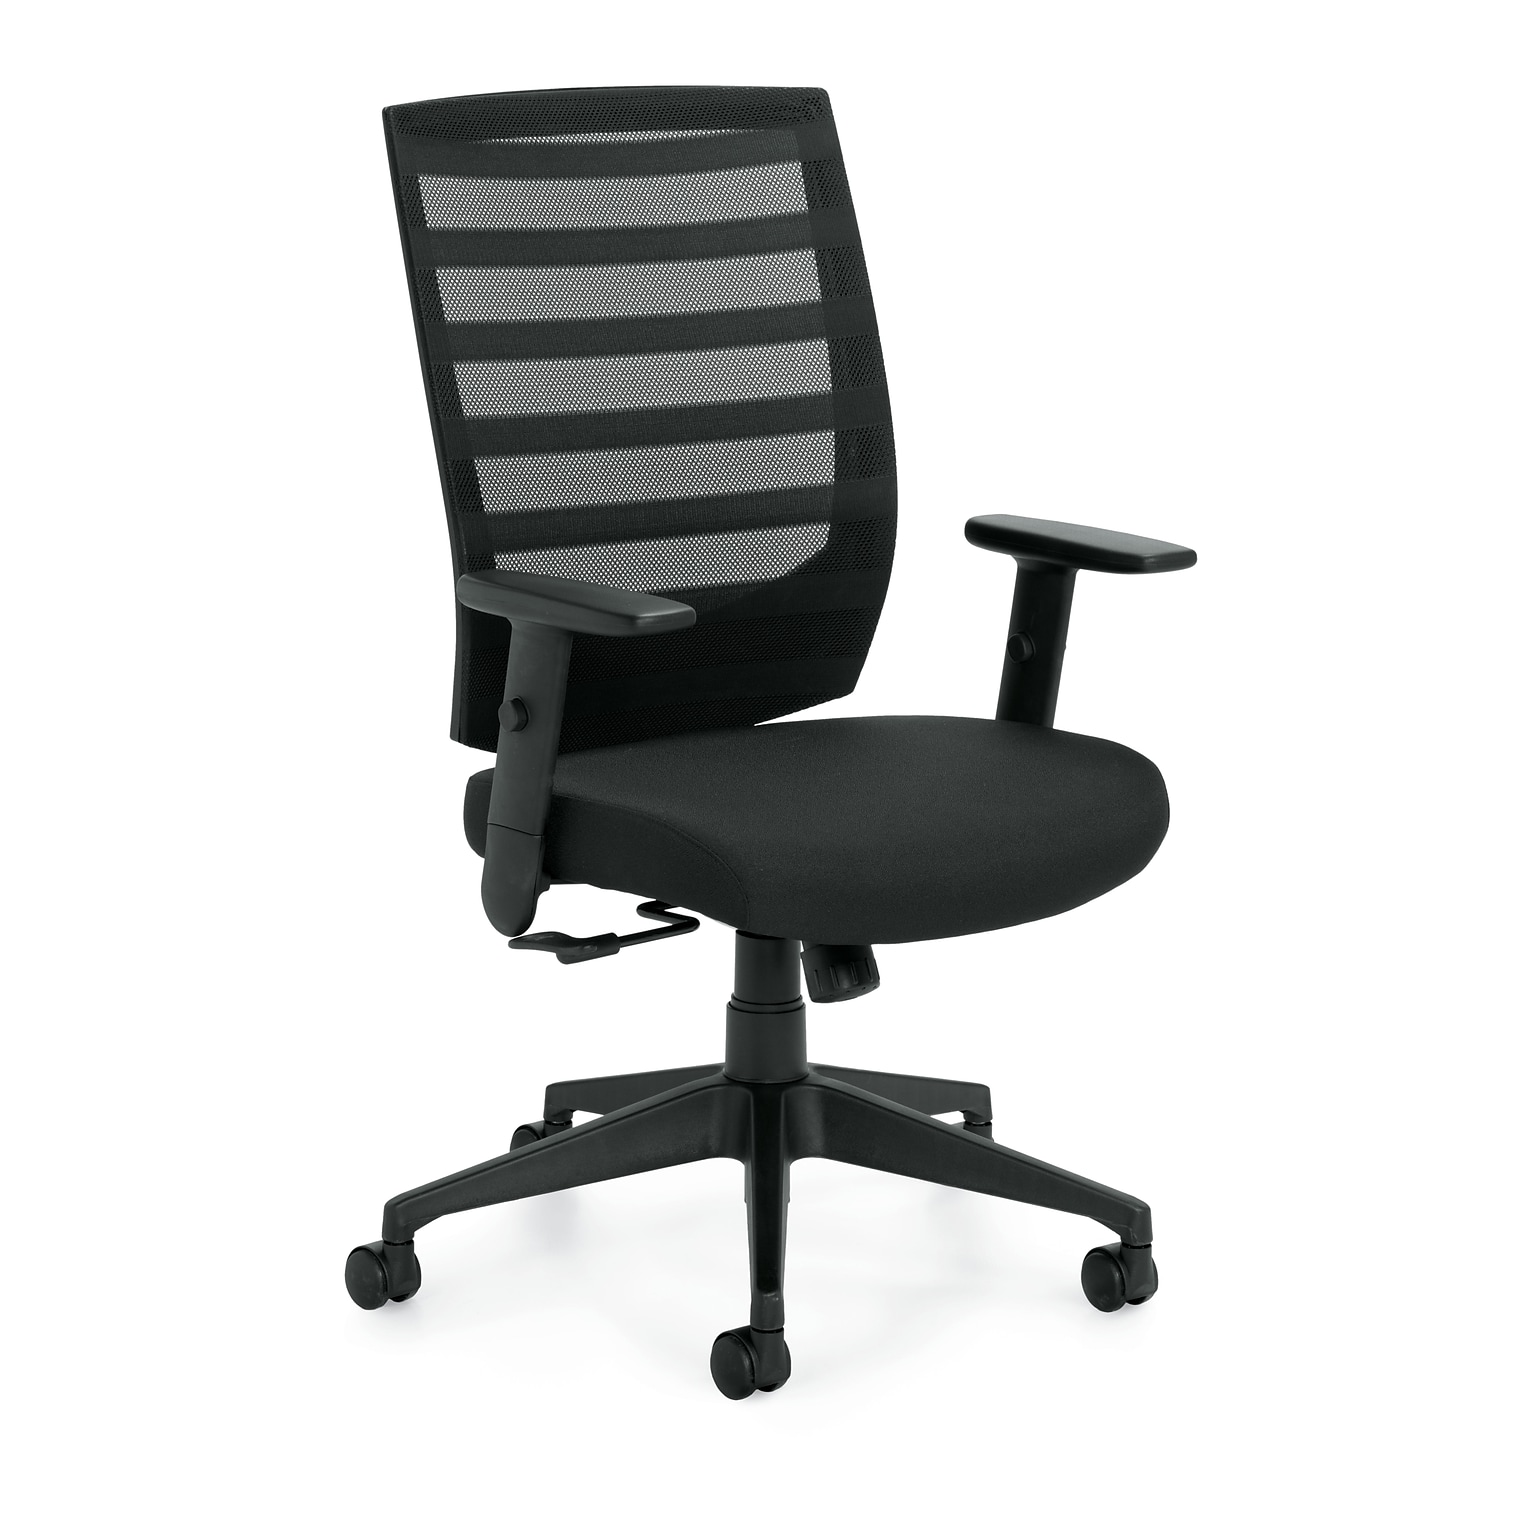 Offices To Go High-Back Mesh Fabric Management Chair, Black, Adjustable Arms (OTG11920B)